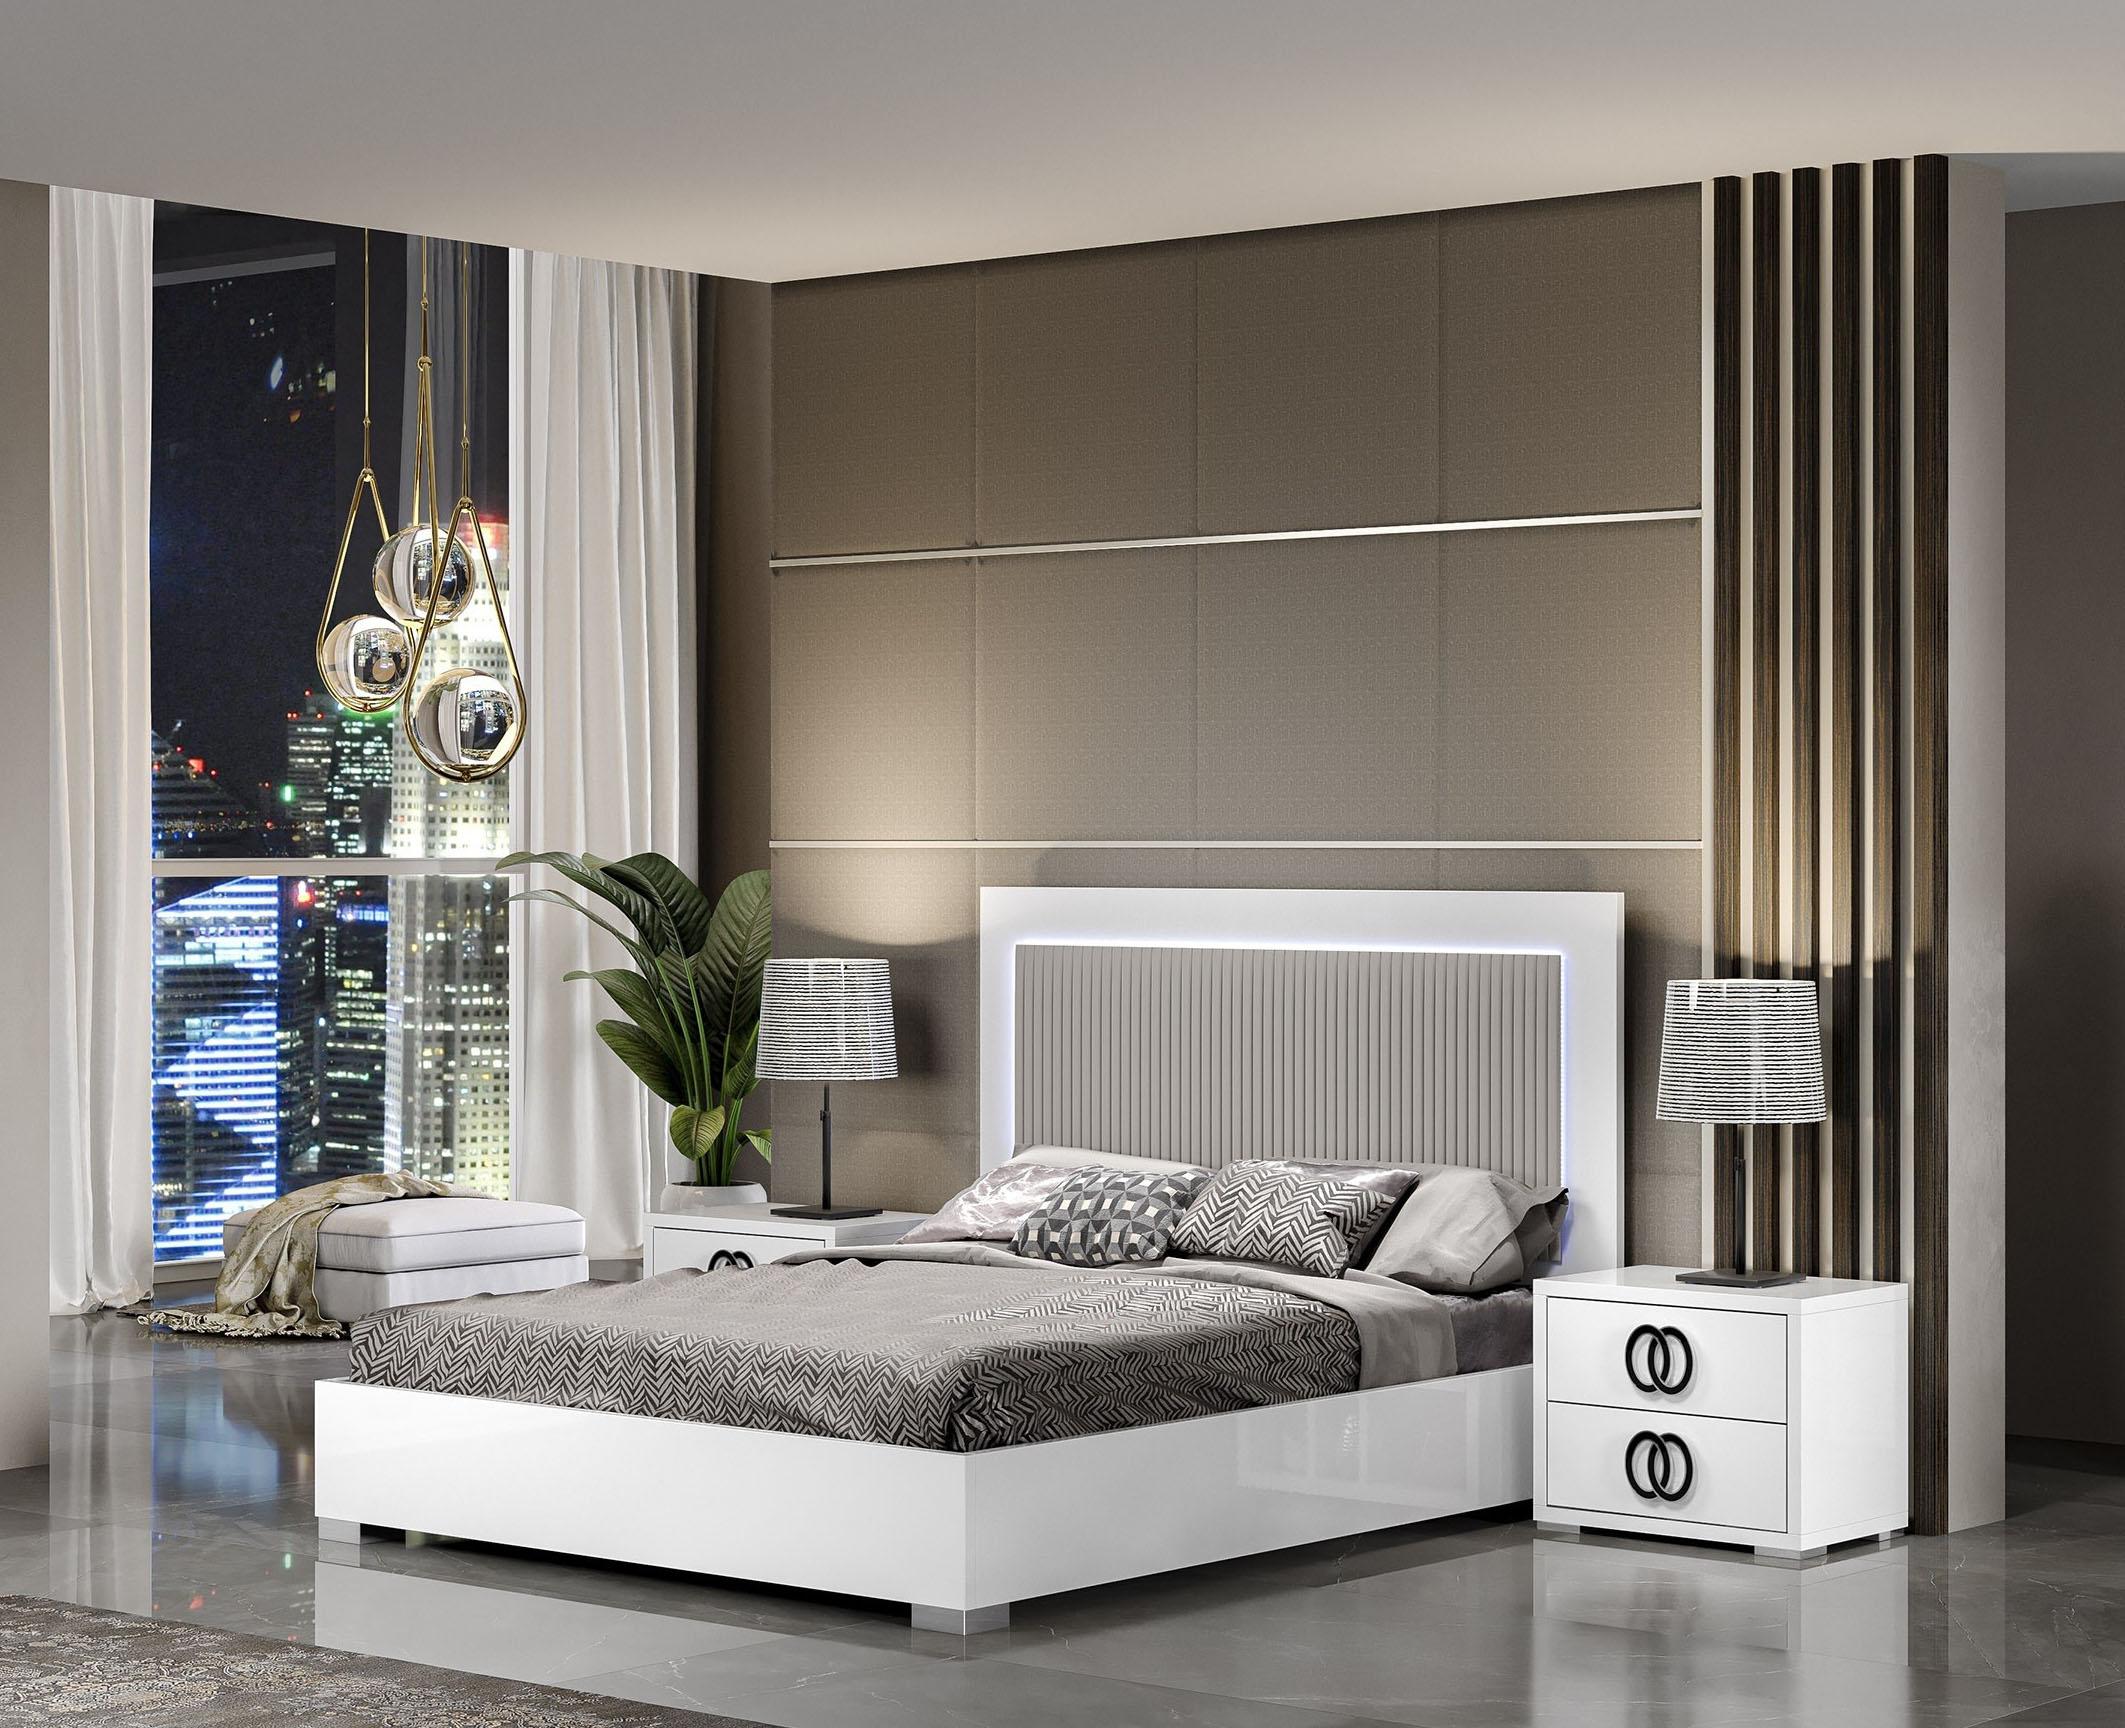 

    
Premium King Size Bedroom Set 6Pcs in White w/ LED light MADE IN ITALY J&M Luxuria
